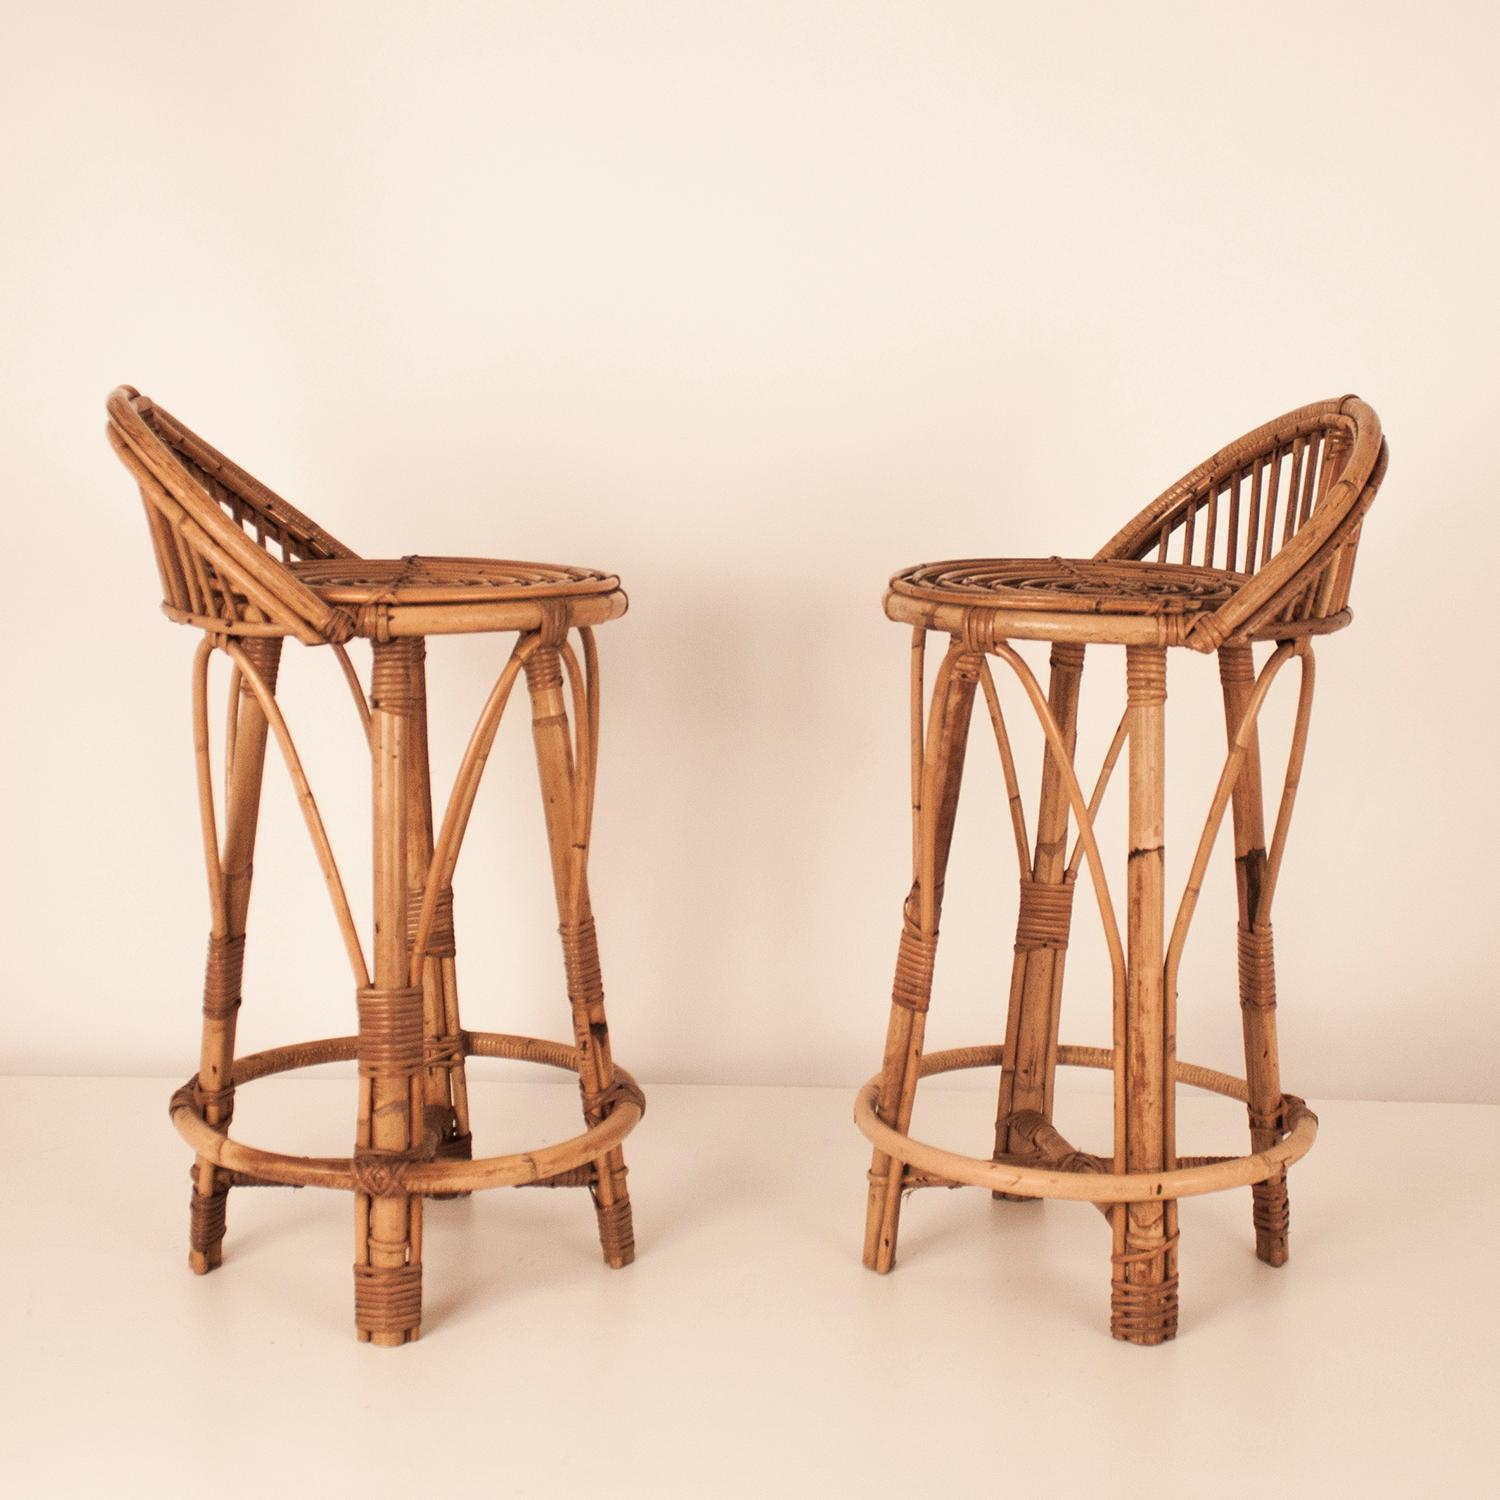 Pair of cane stools, Spain, circa 1970.
Woven cane.